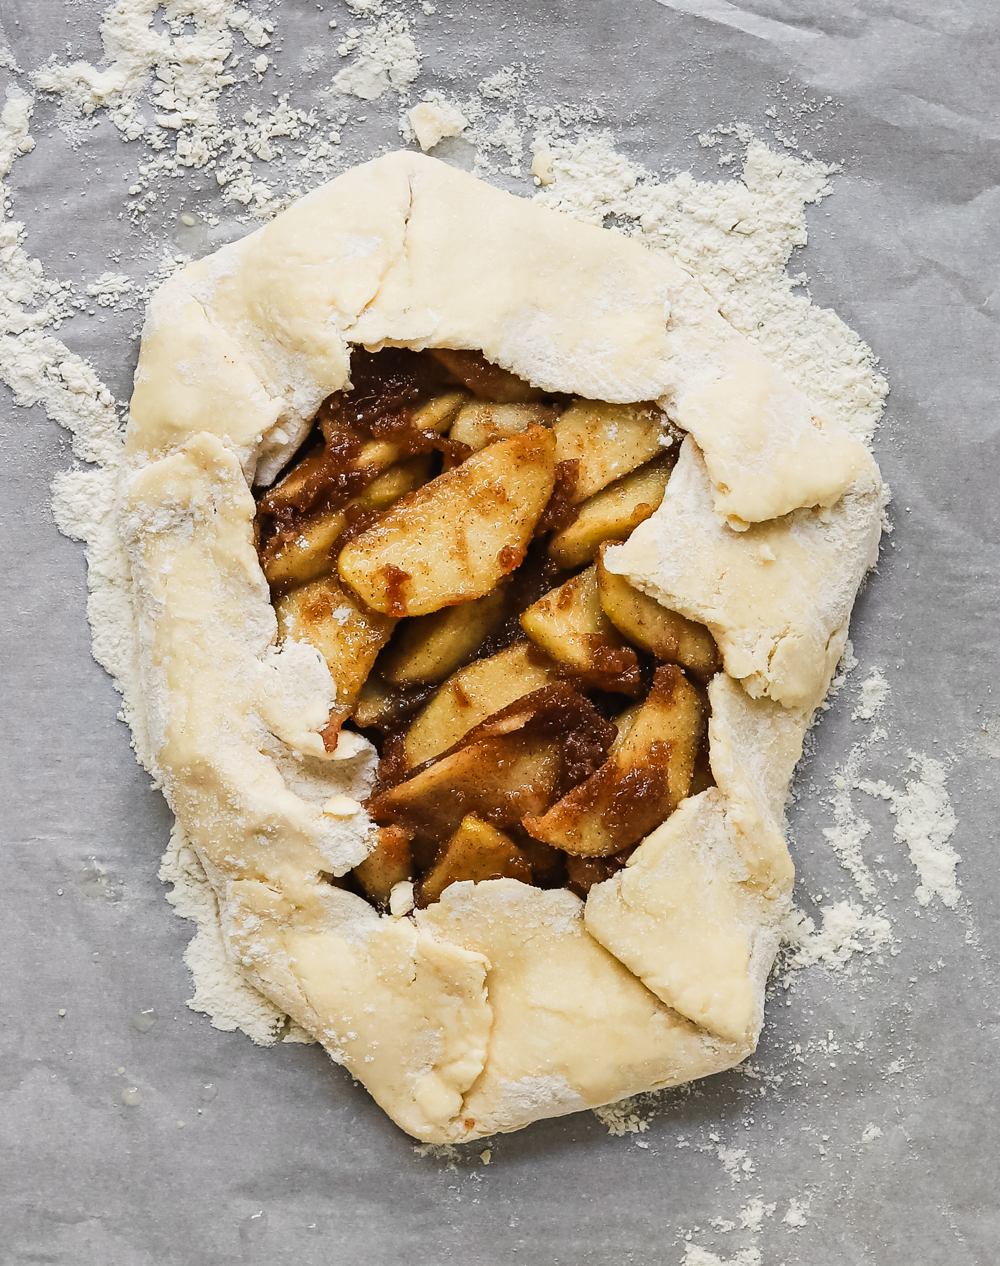 Unbaked galette on a floured piece of parchment paper.